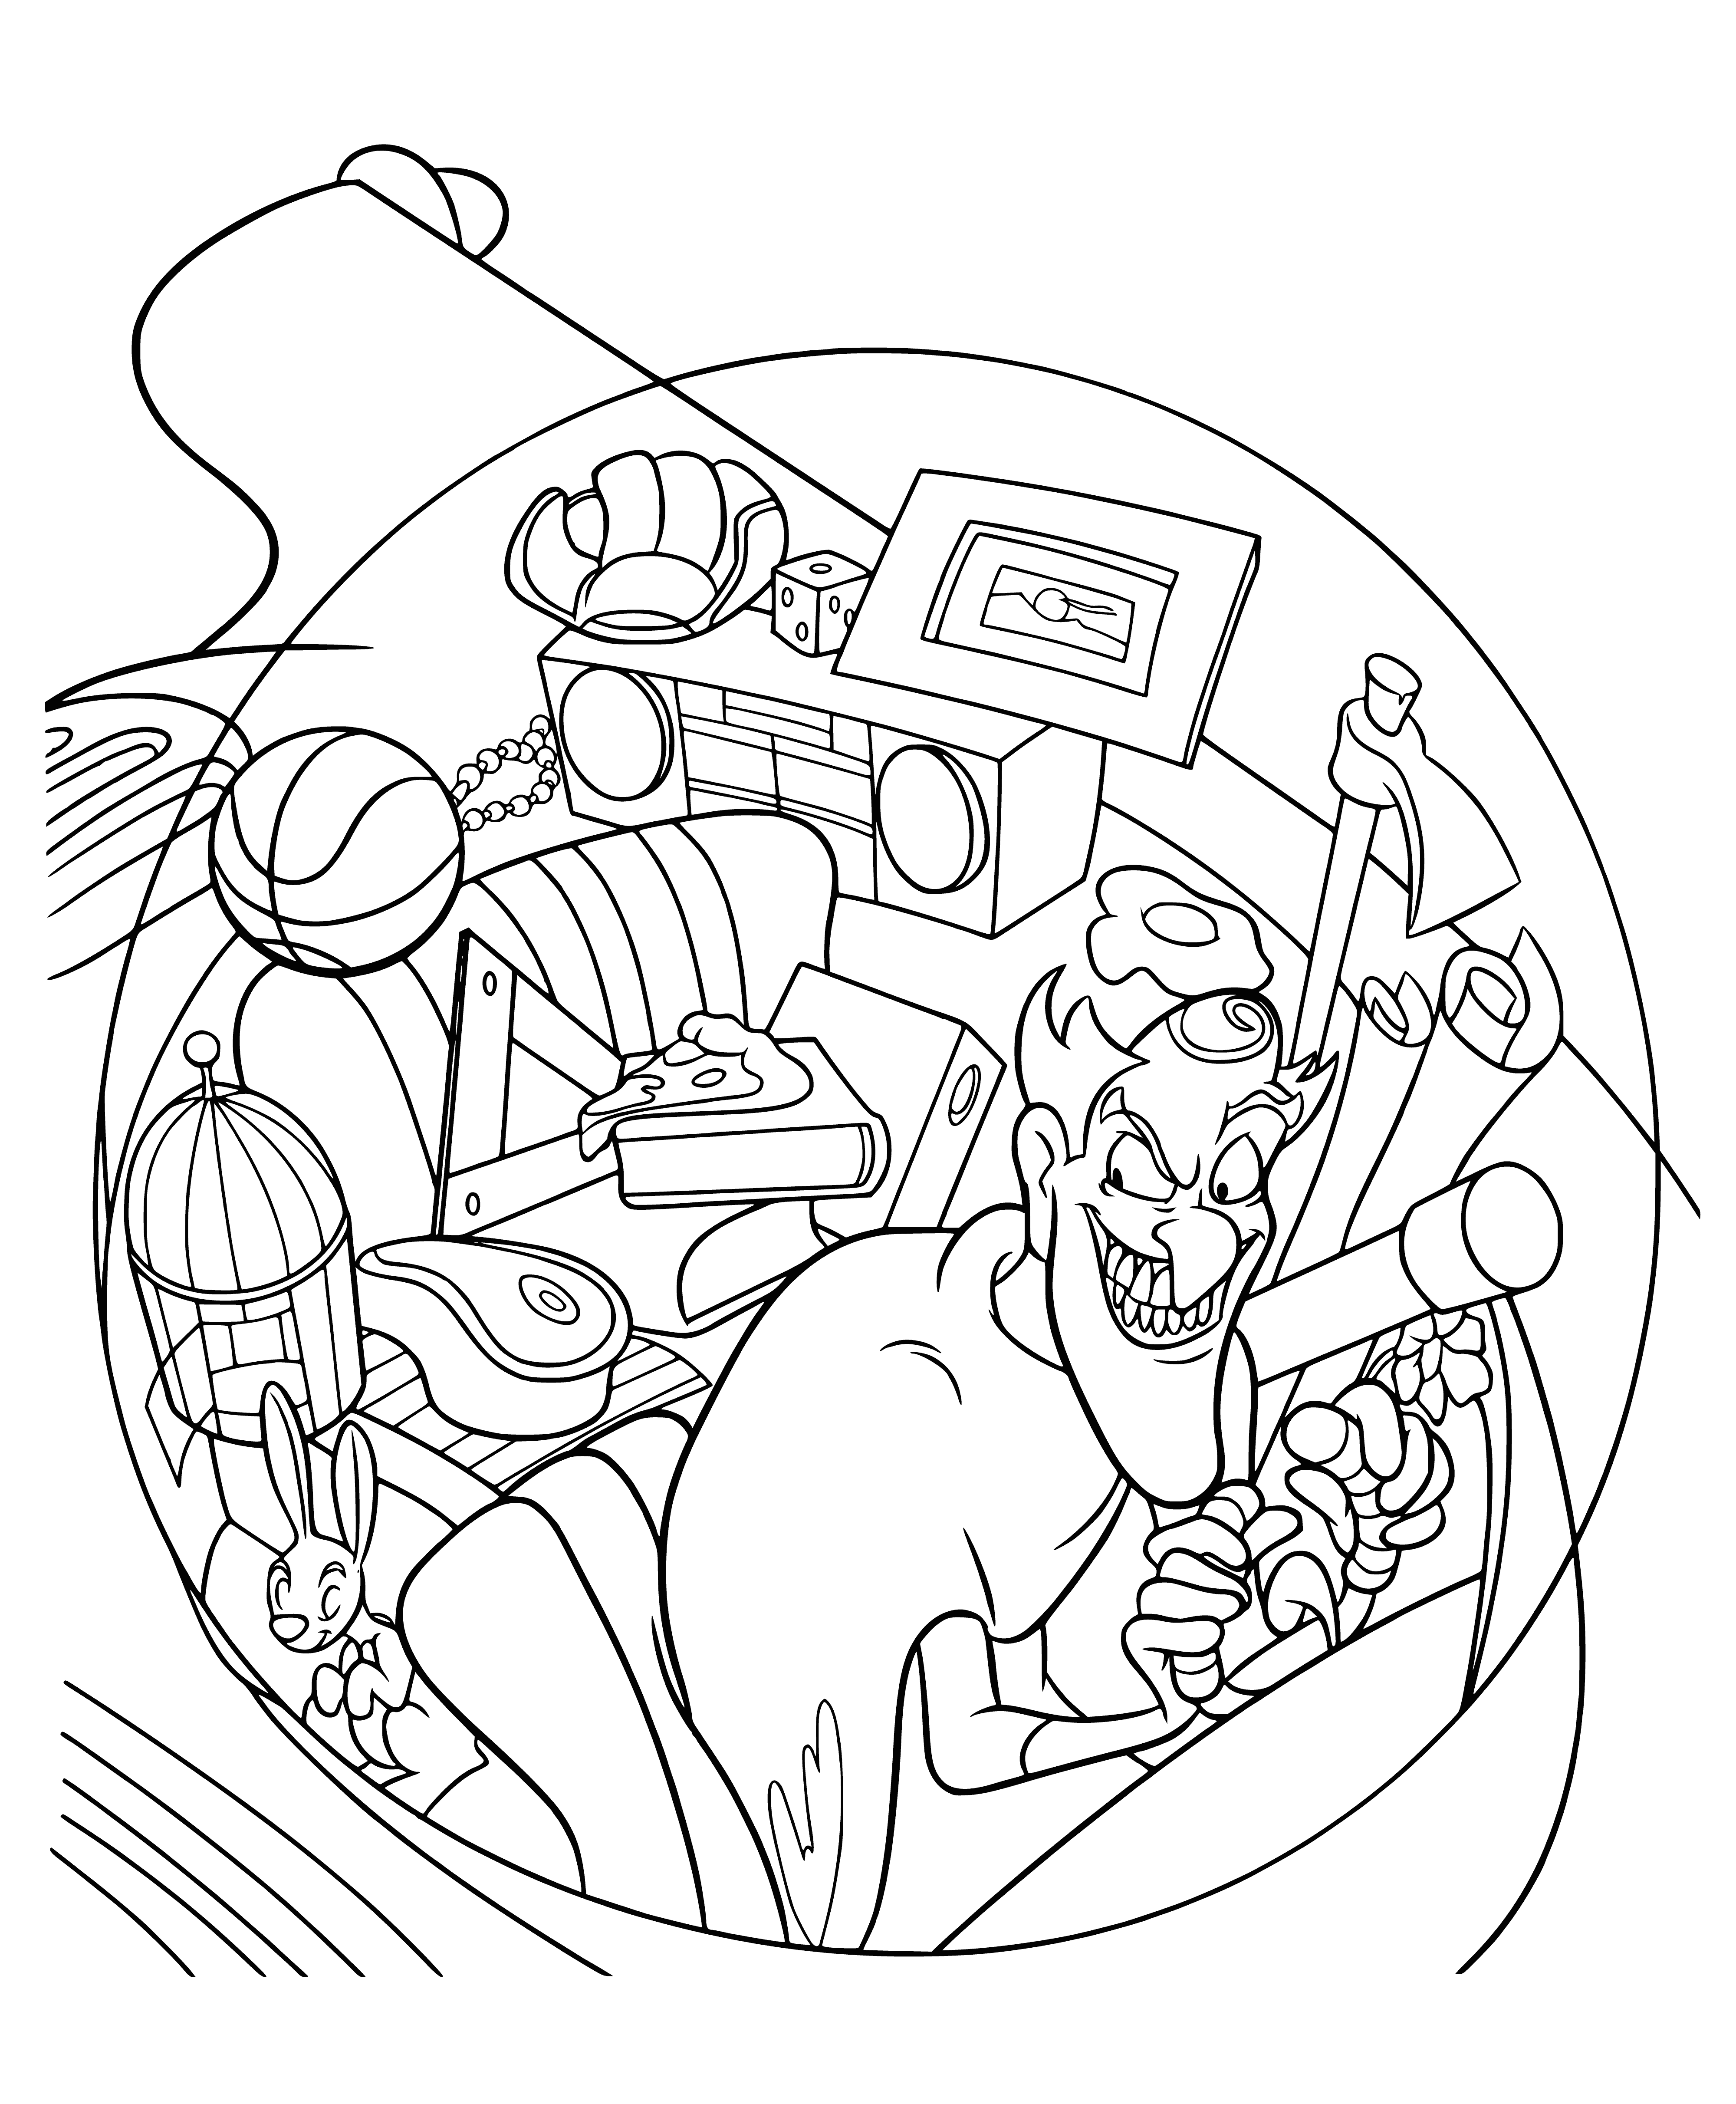 coloring page: Time machine that can travel forward/backward, has circular screen & two levers, metal frame & legs.